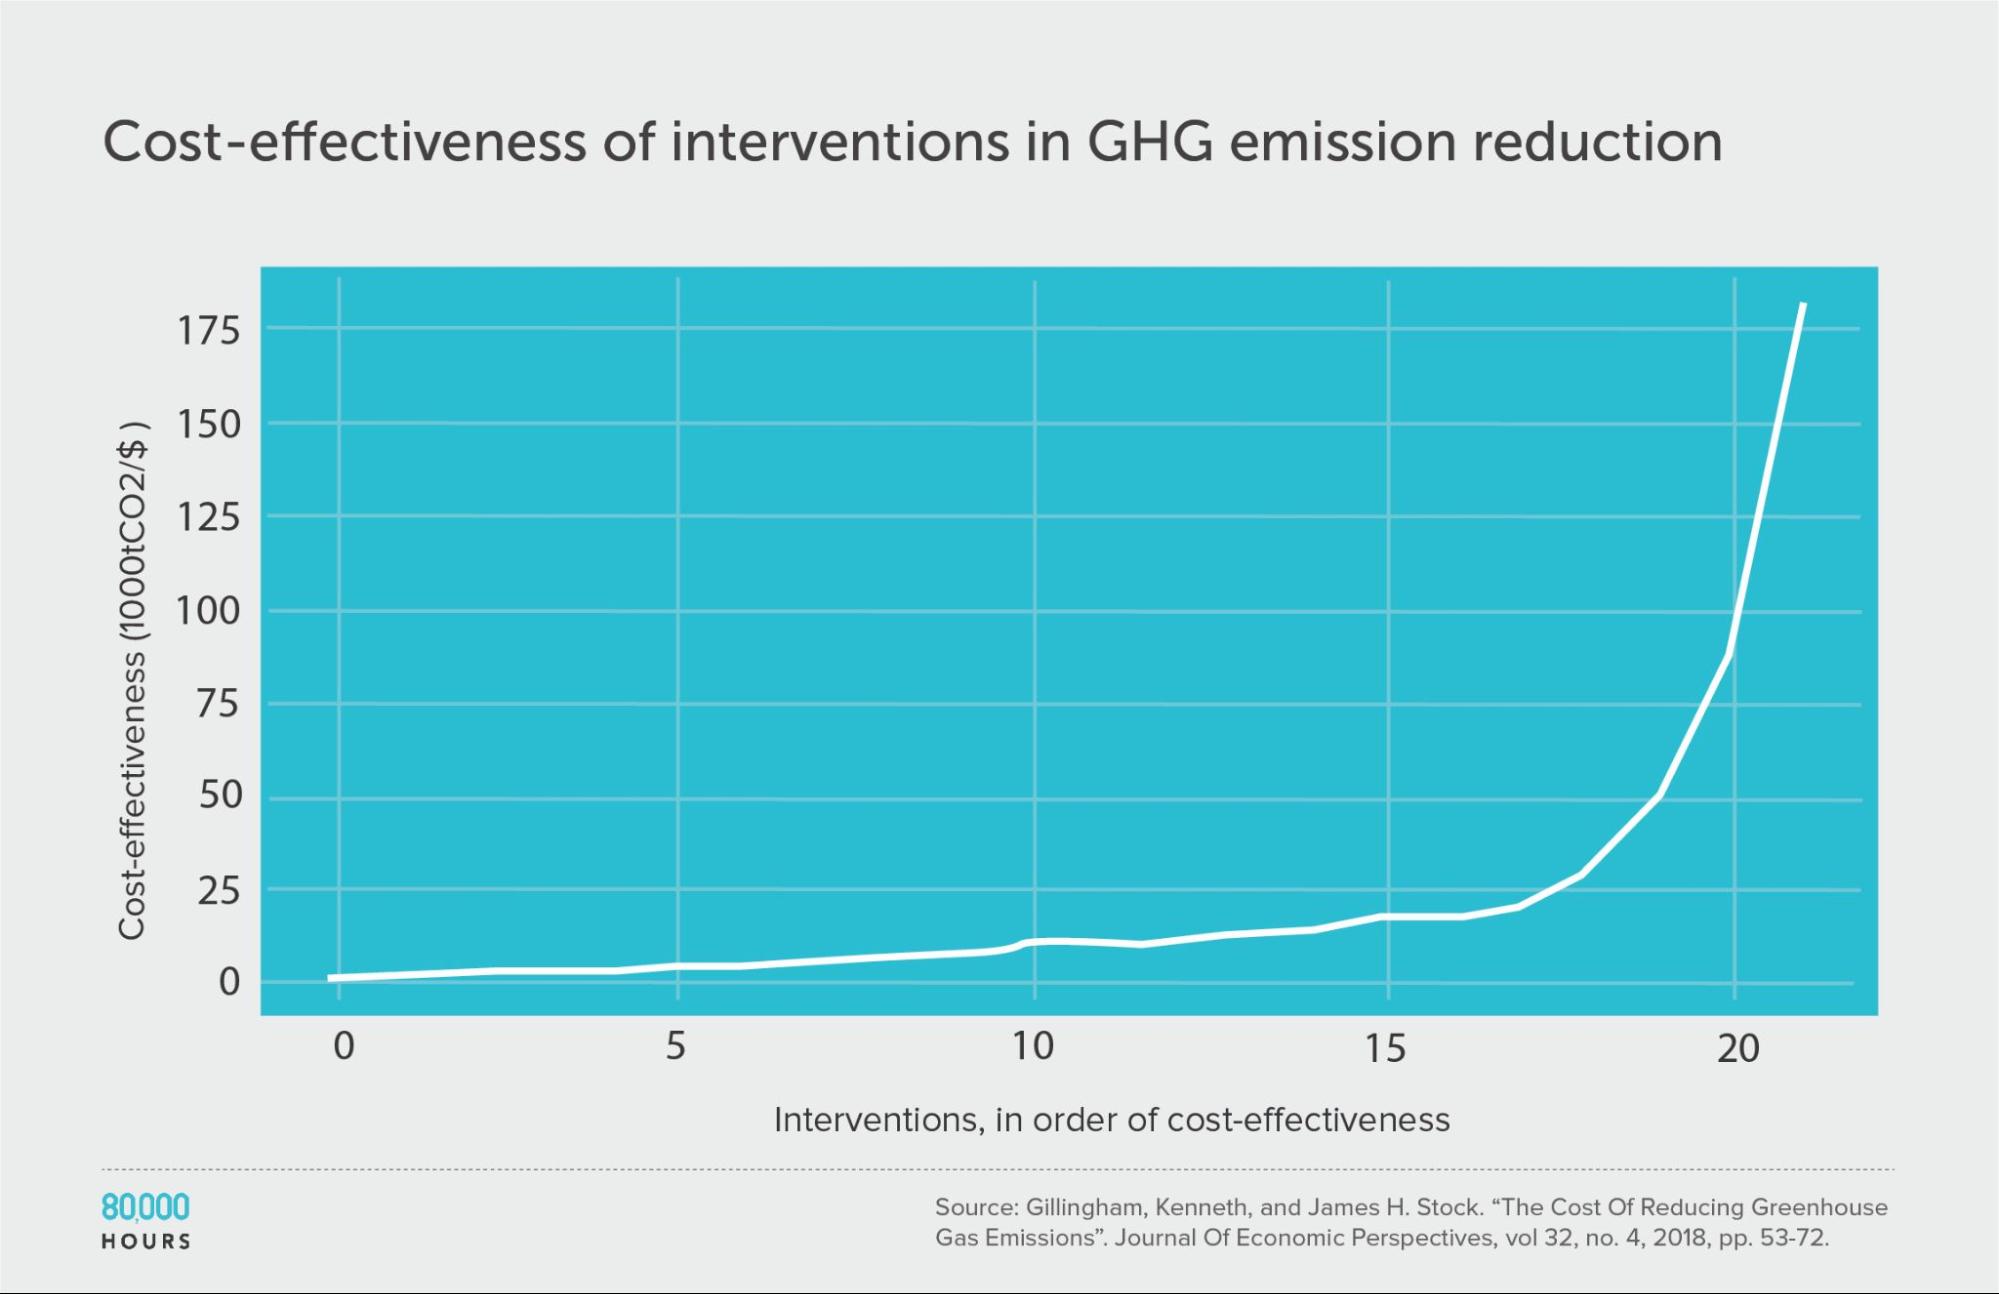 Gillingham and Stock graph of interventions to reduce GHG